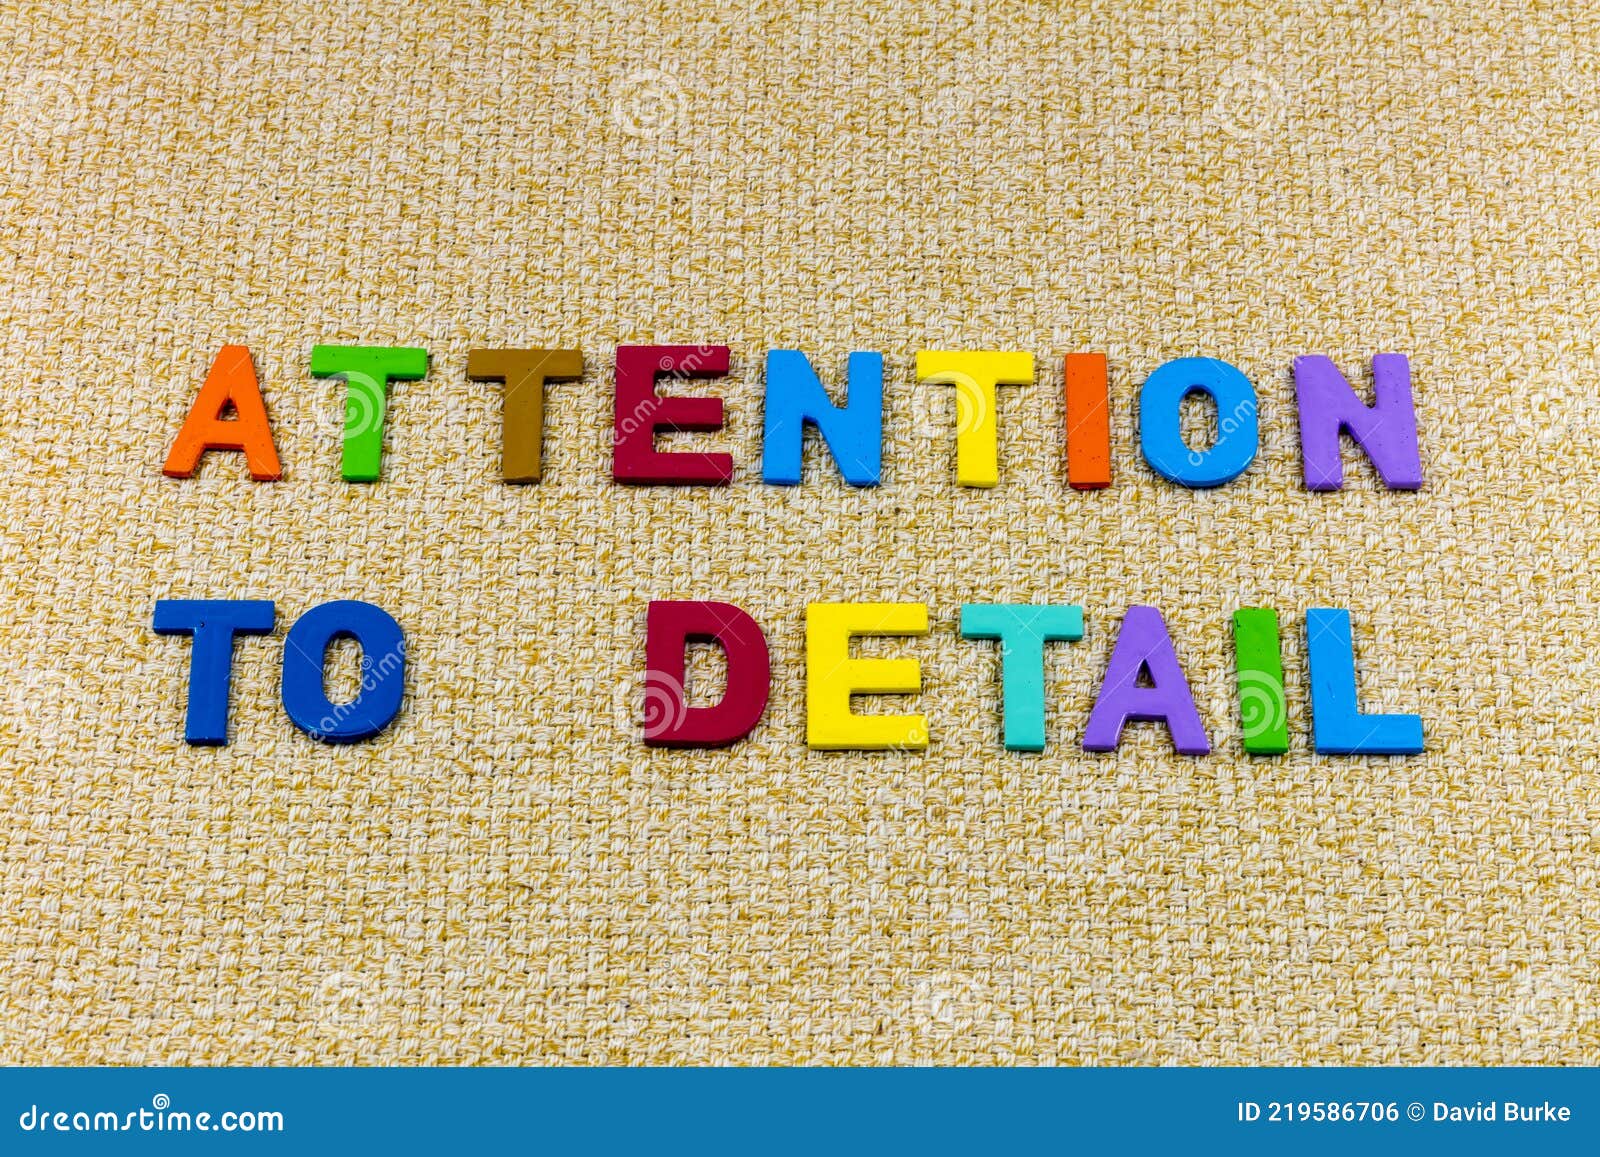 attention detail attentive business focus exact deliberate expert intent